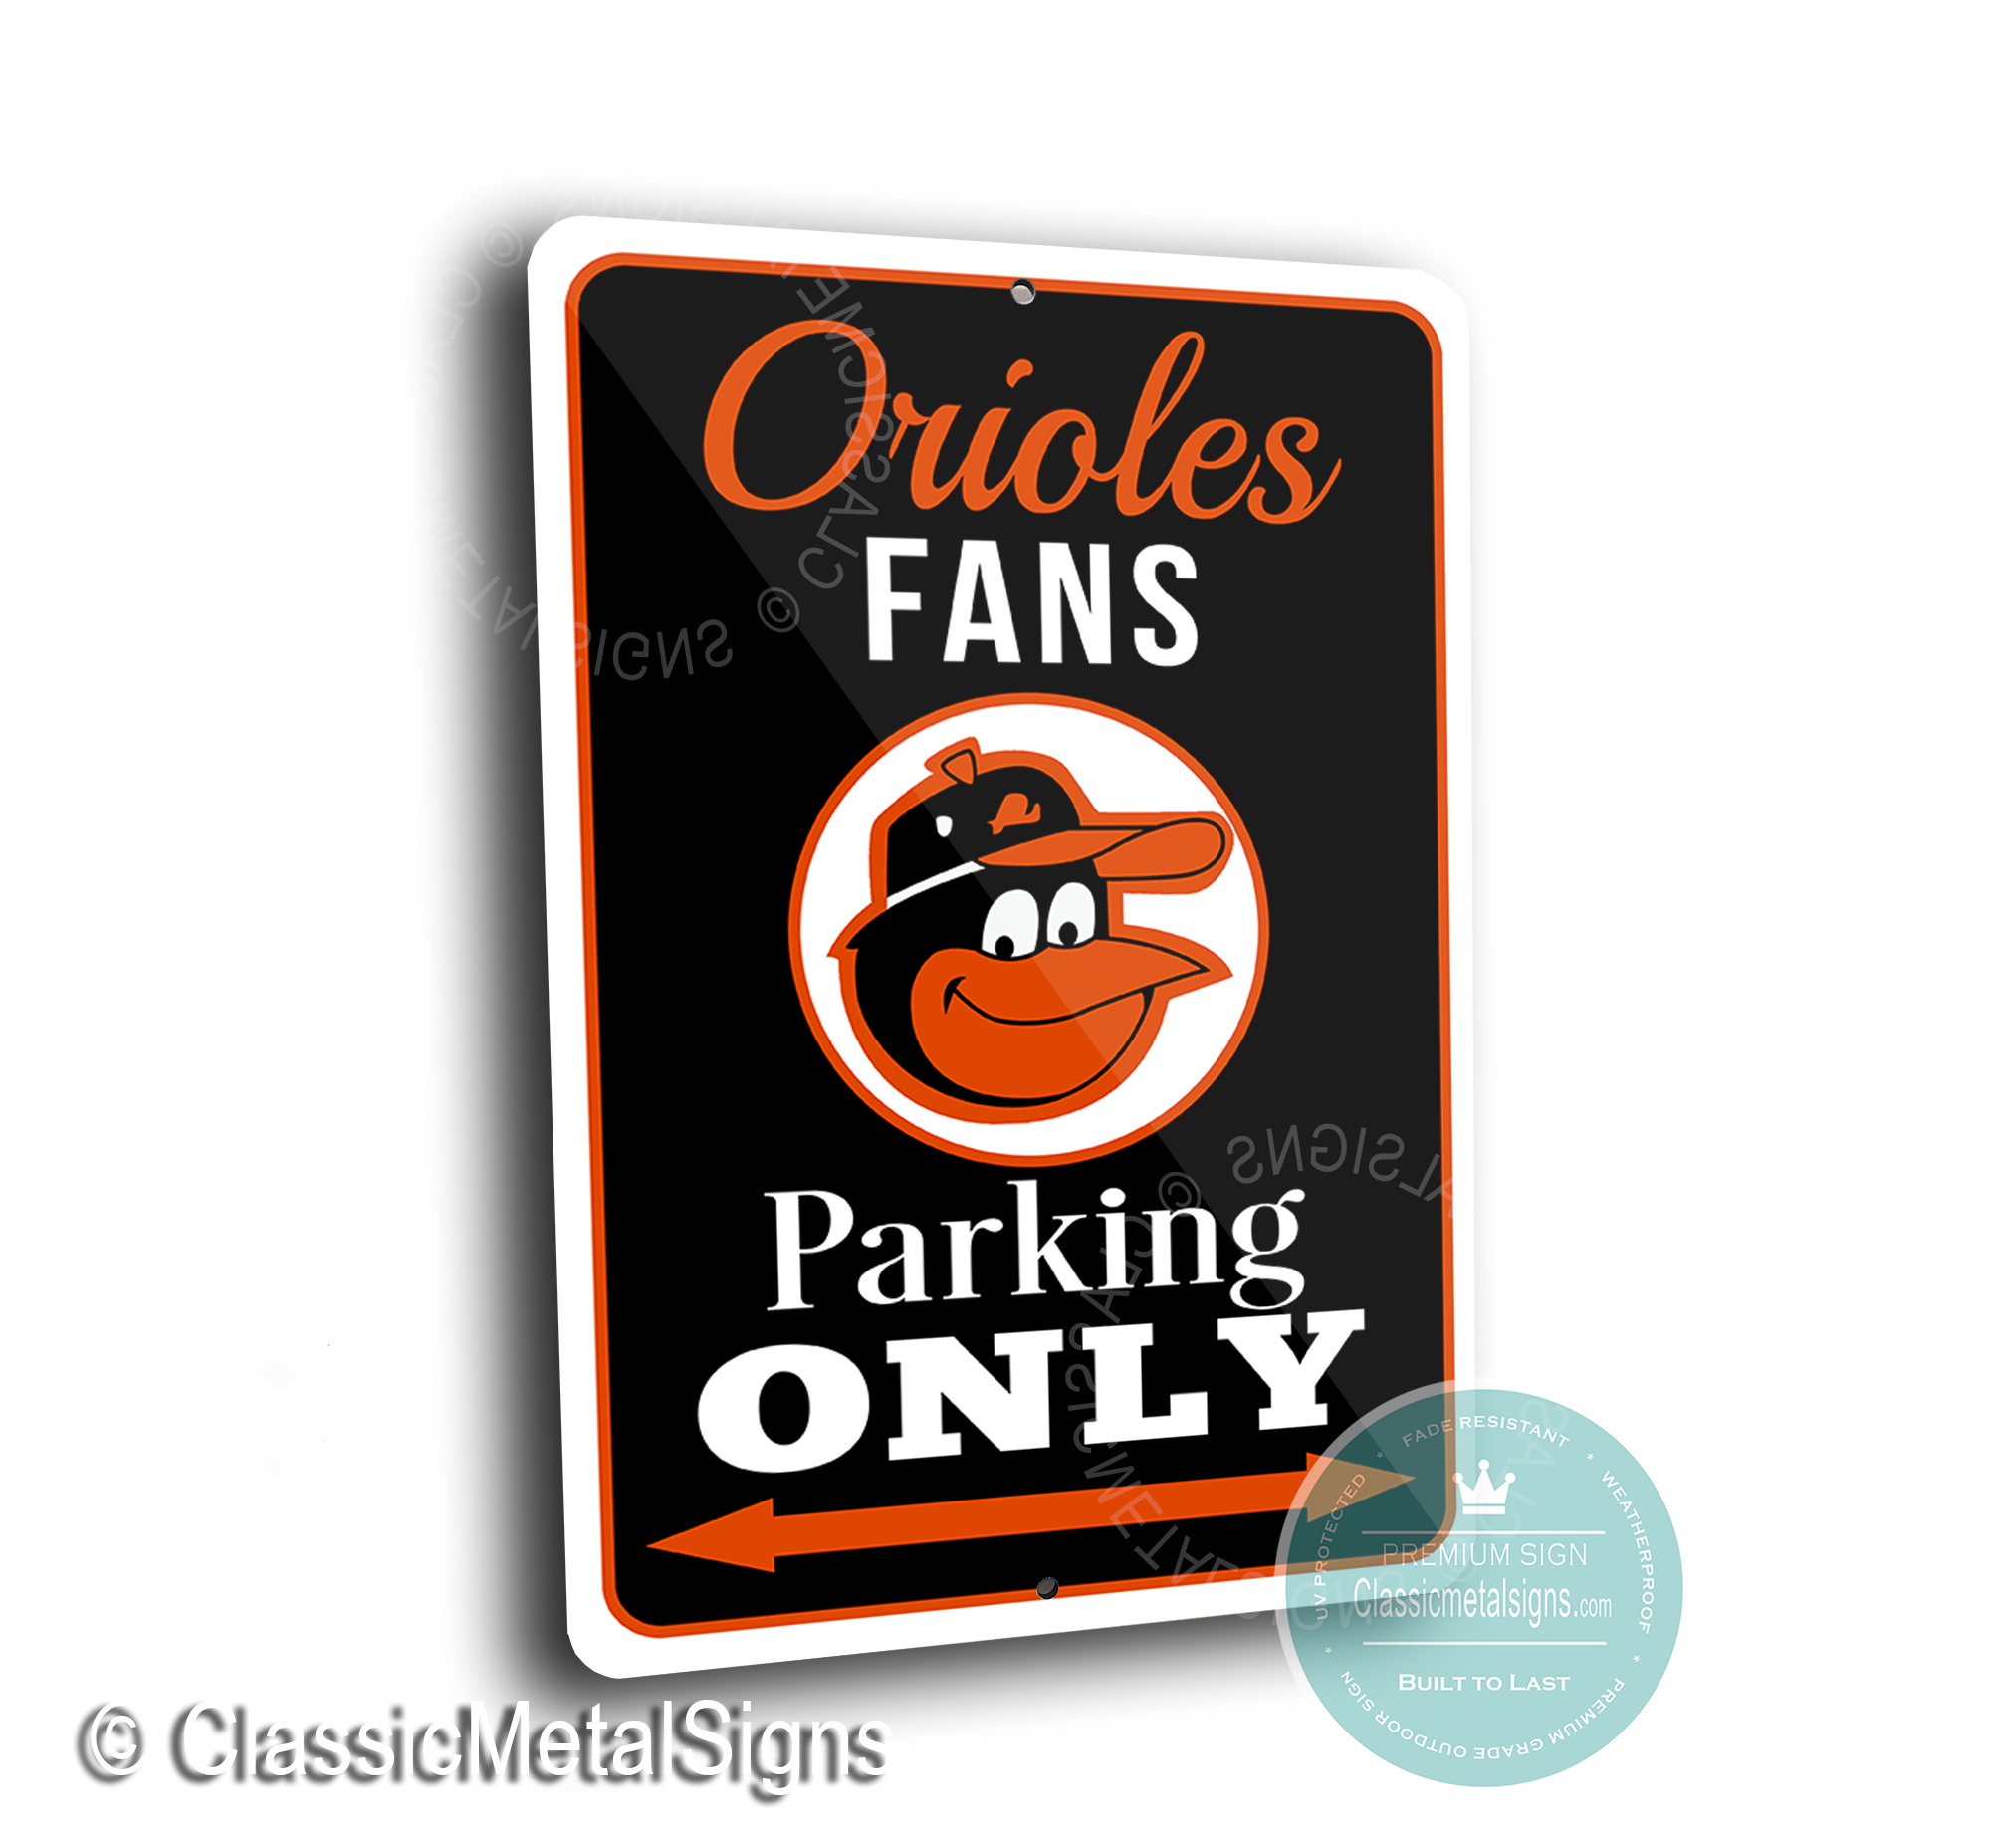 Baltimore Orioles Parking Only Sign